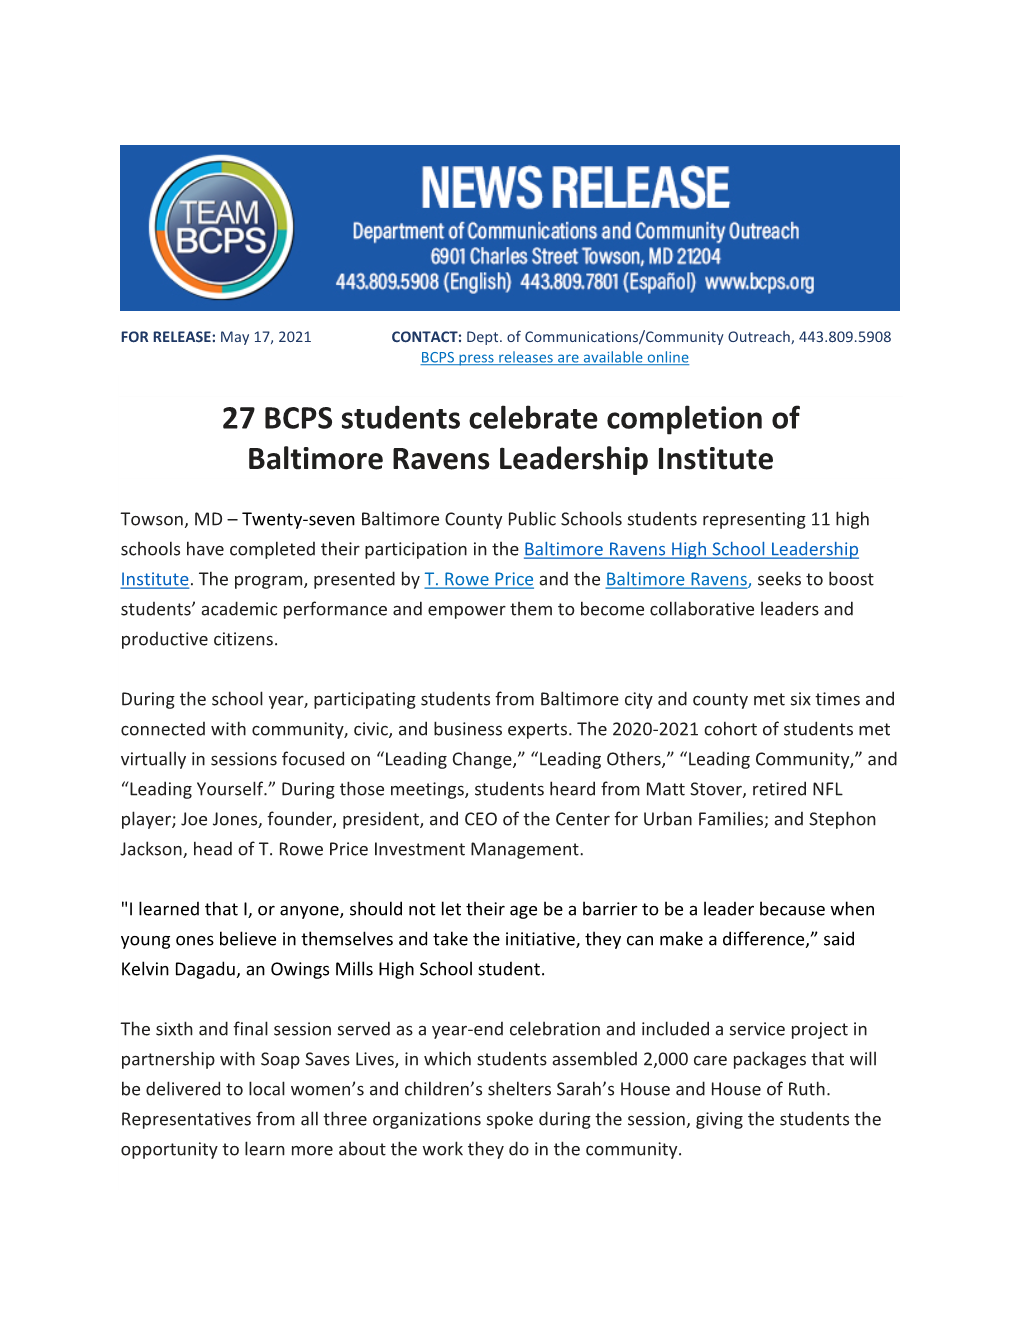 27 BCPS Students Celebrate Completion of Baltimore Ravens Leadership Institute